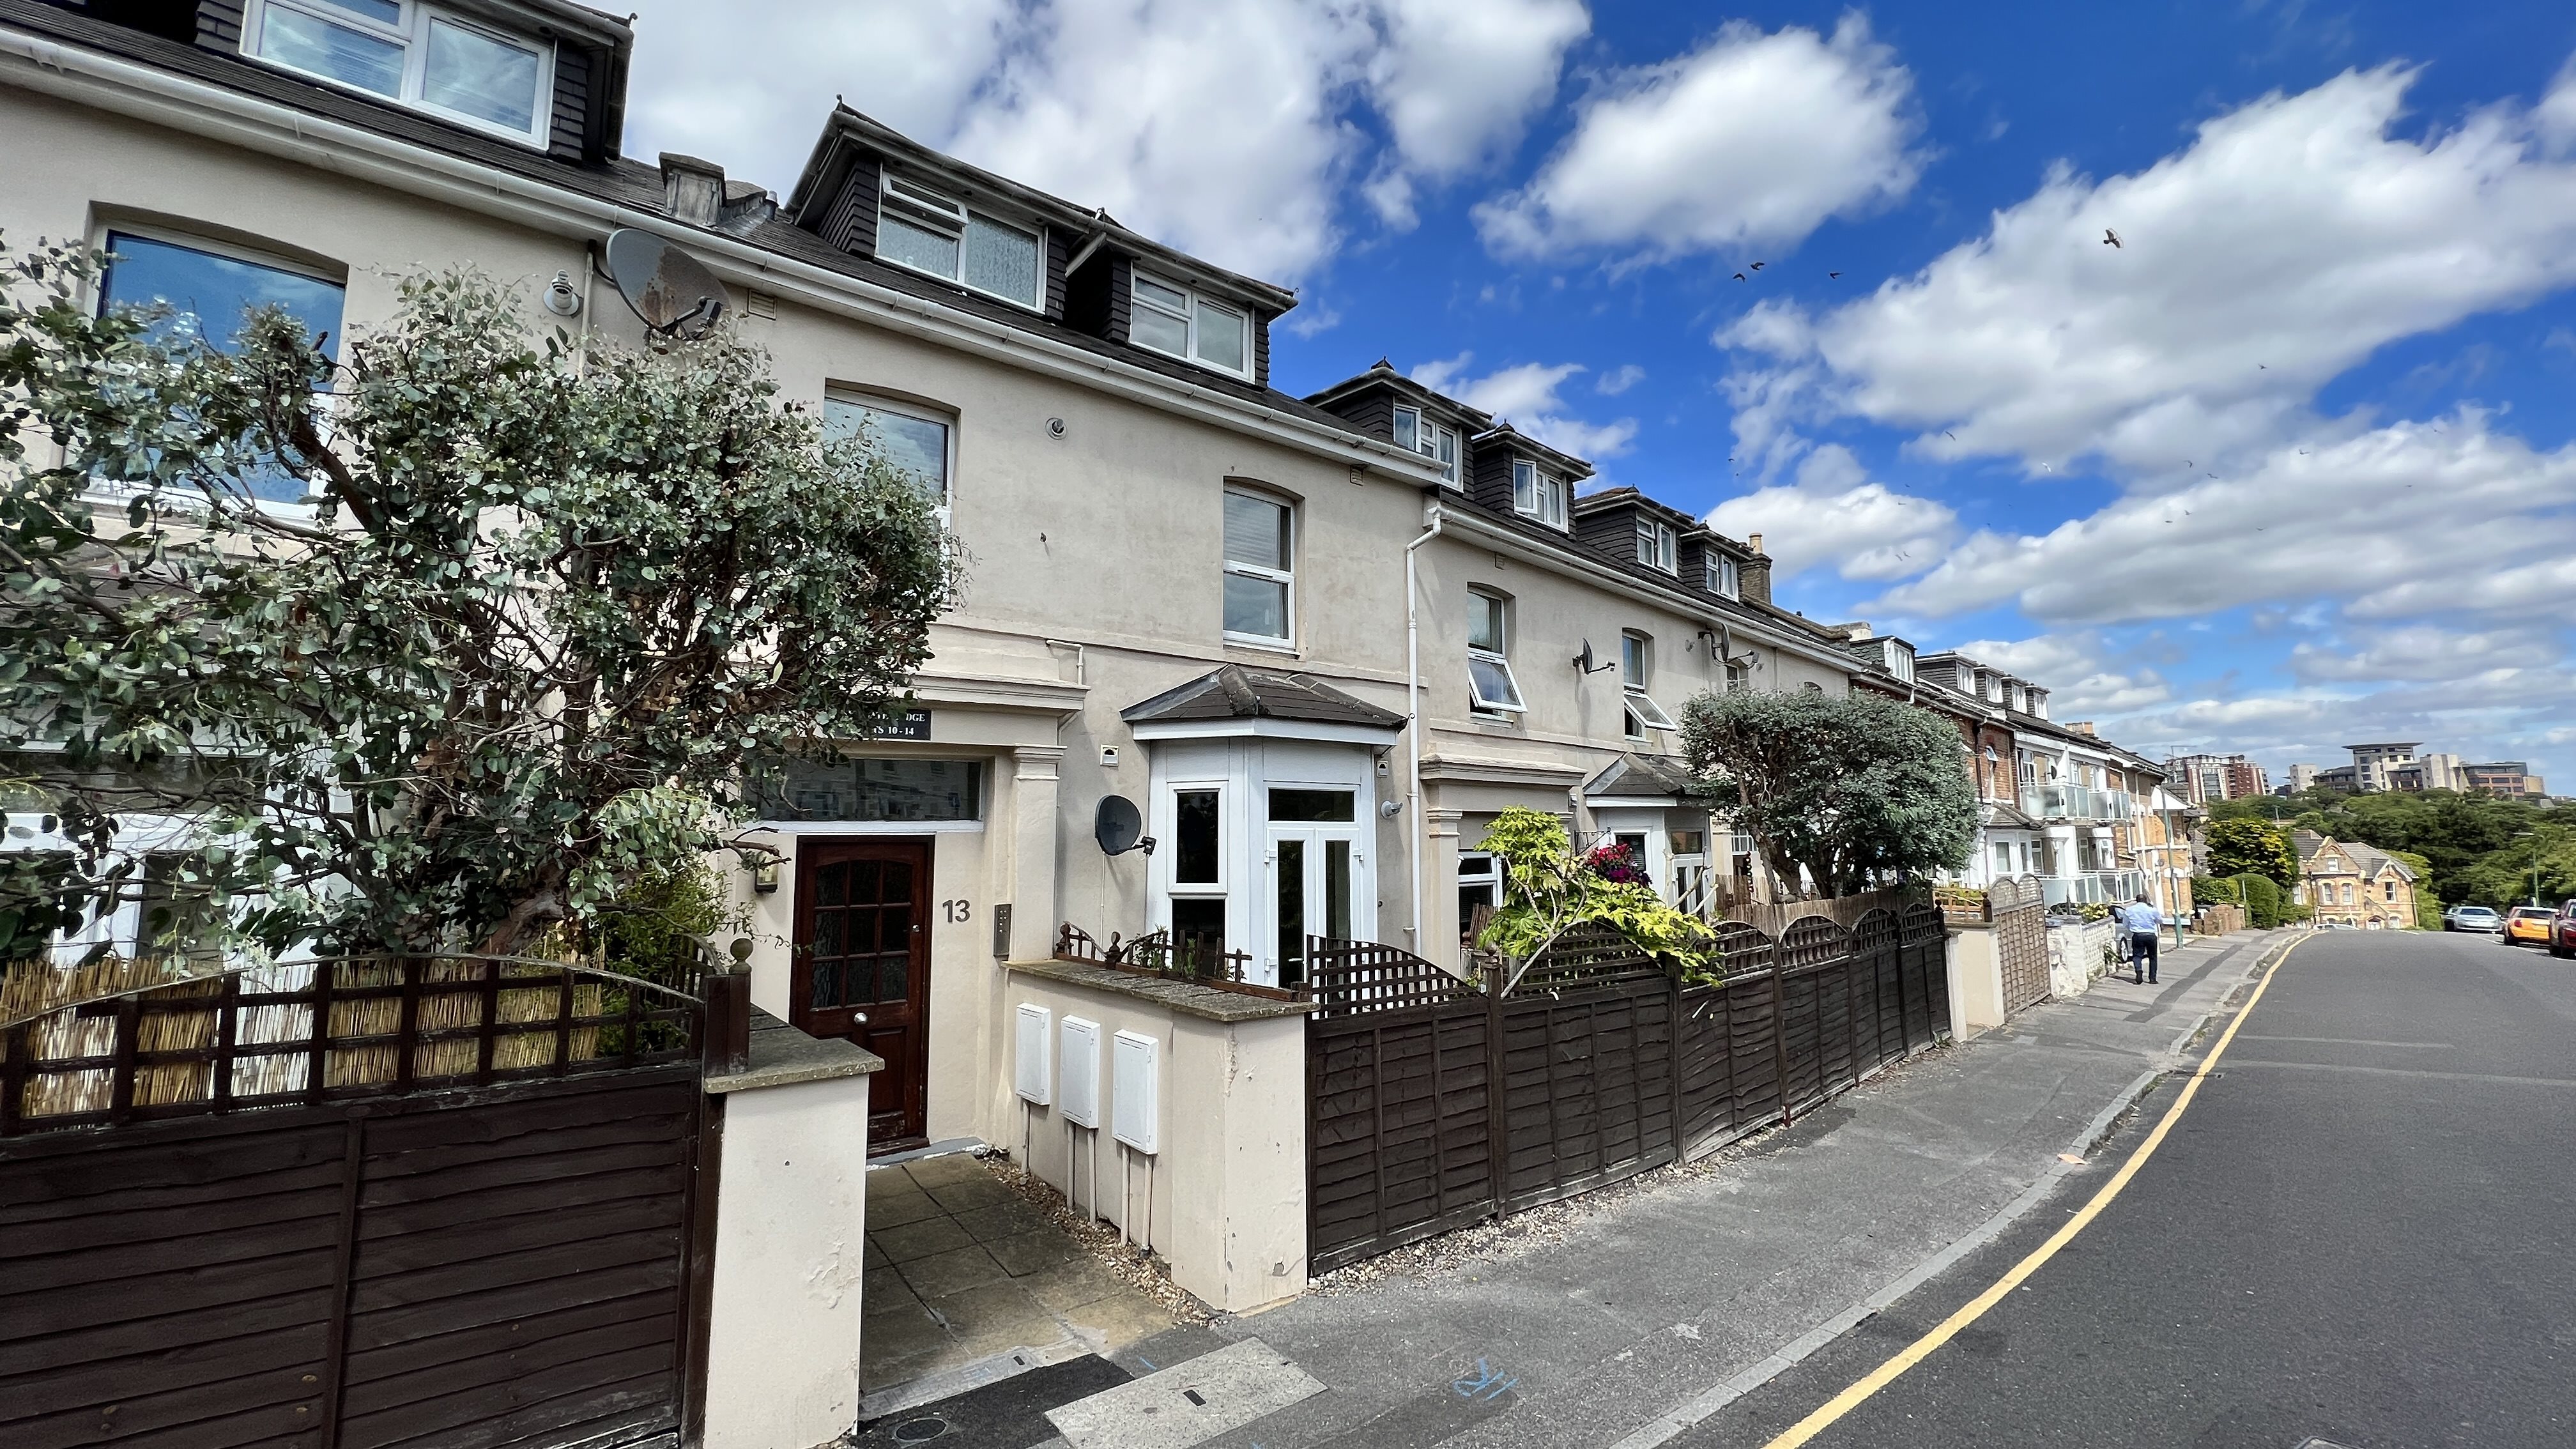 Christopher Shaw Residential is delighted to bring to the market this attractive 1 double bedroom ground floor flat with private outside space in the heart of Bournemouth Town Centre...Very competitive service charges and a healthy lease. Tenant in Situ...